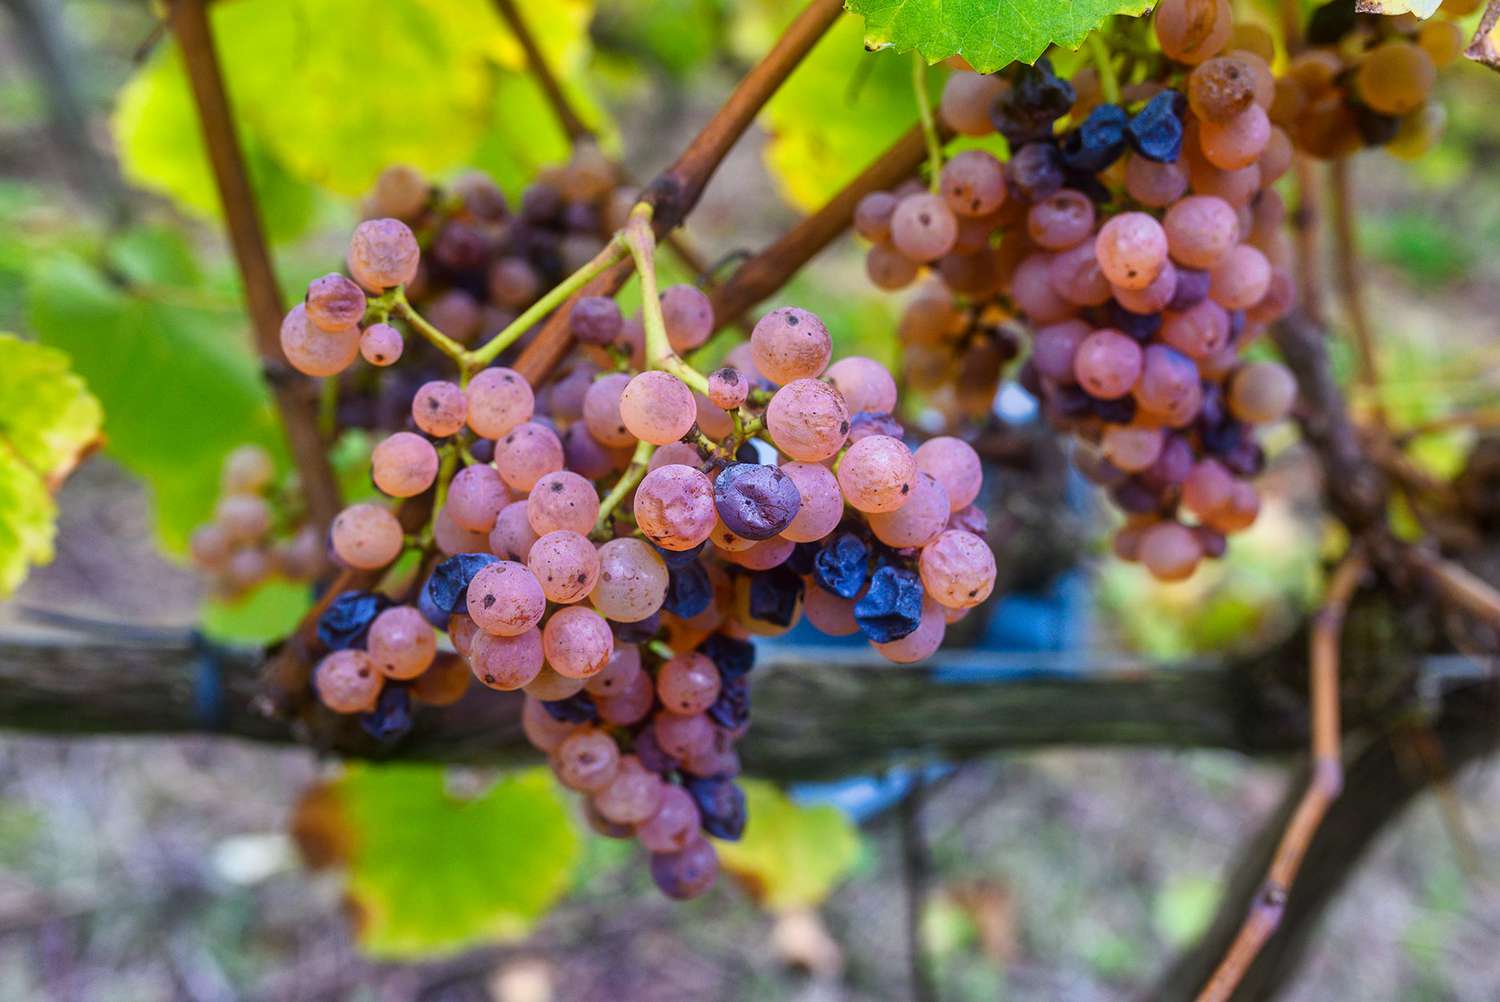 Australian Wine Producers Have Been Mislabeling This Variety for Over 40 Years